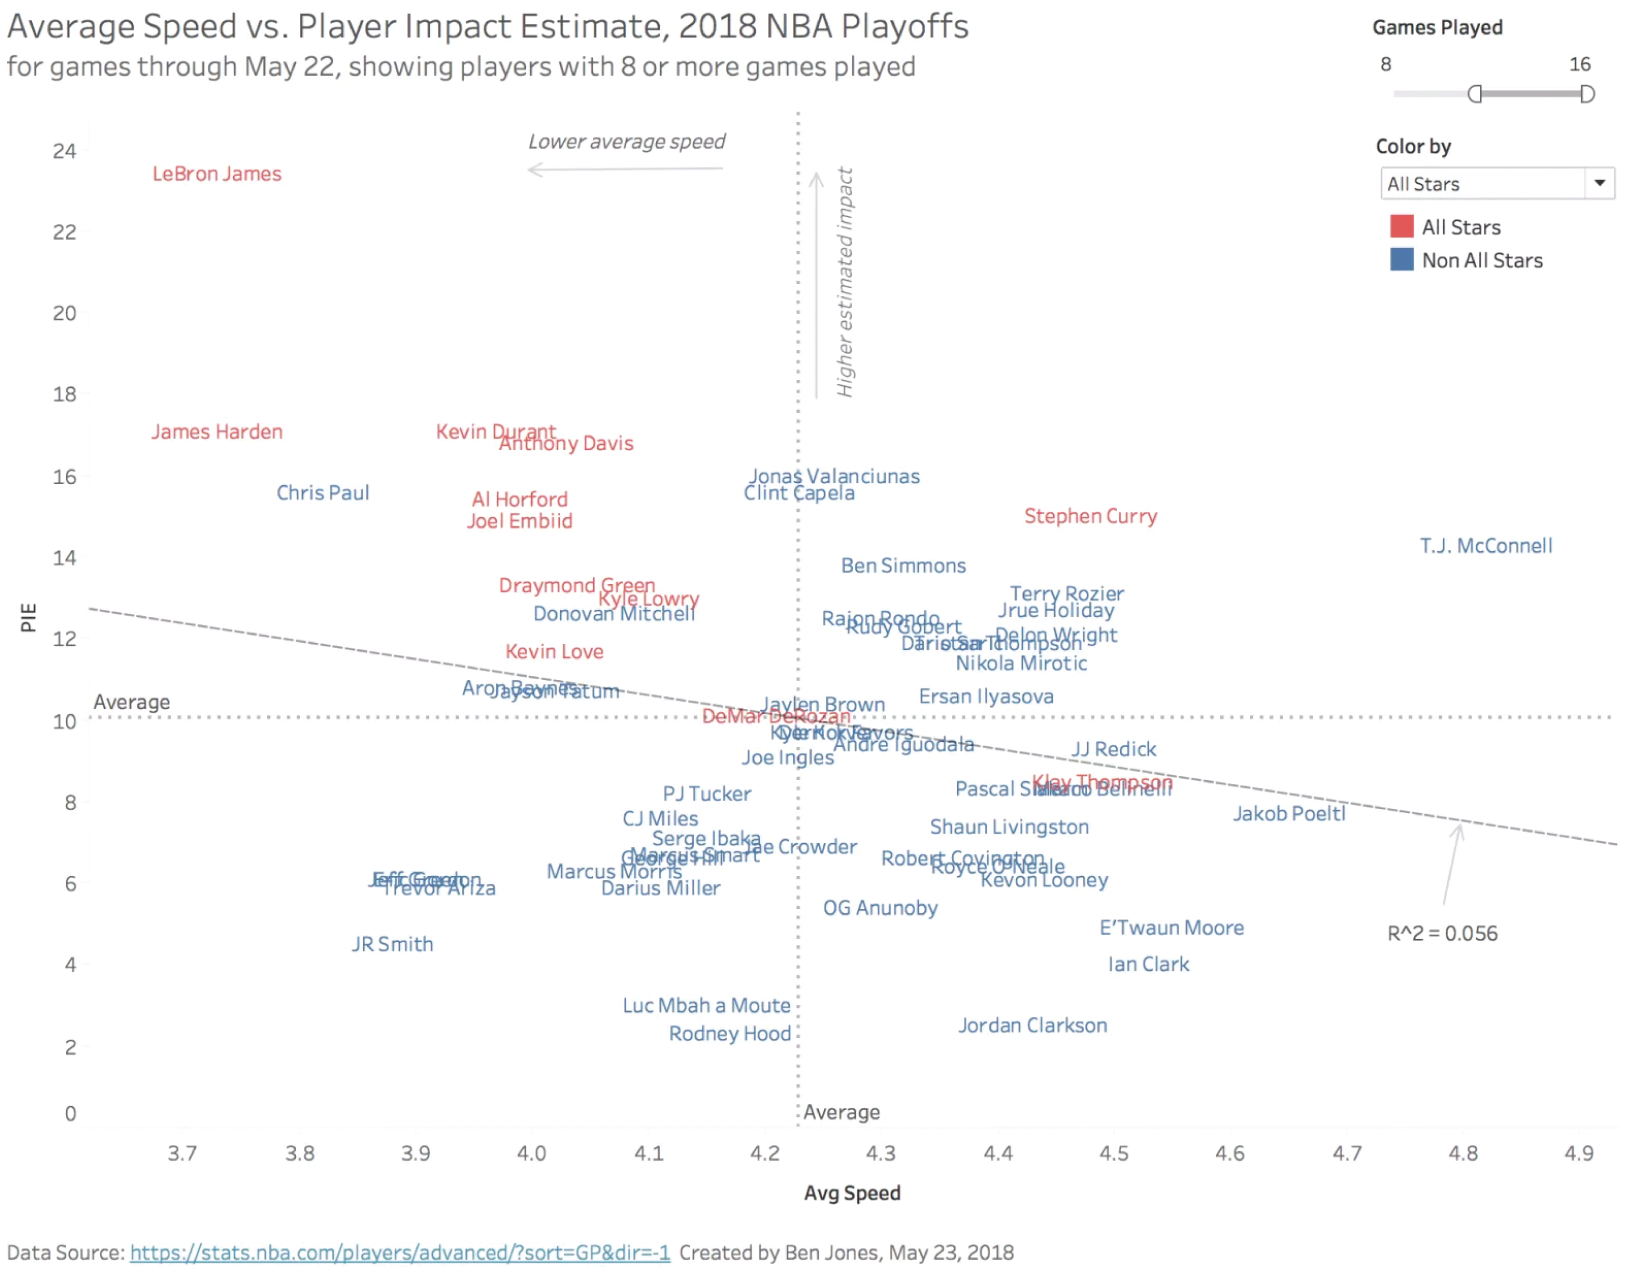 Graph depicting the average speed versus player impact estimate of the 2018 NBA playoffs for games through May 22, the players with 8 or more games played.